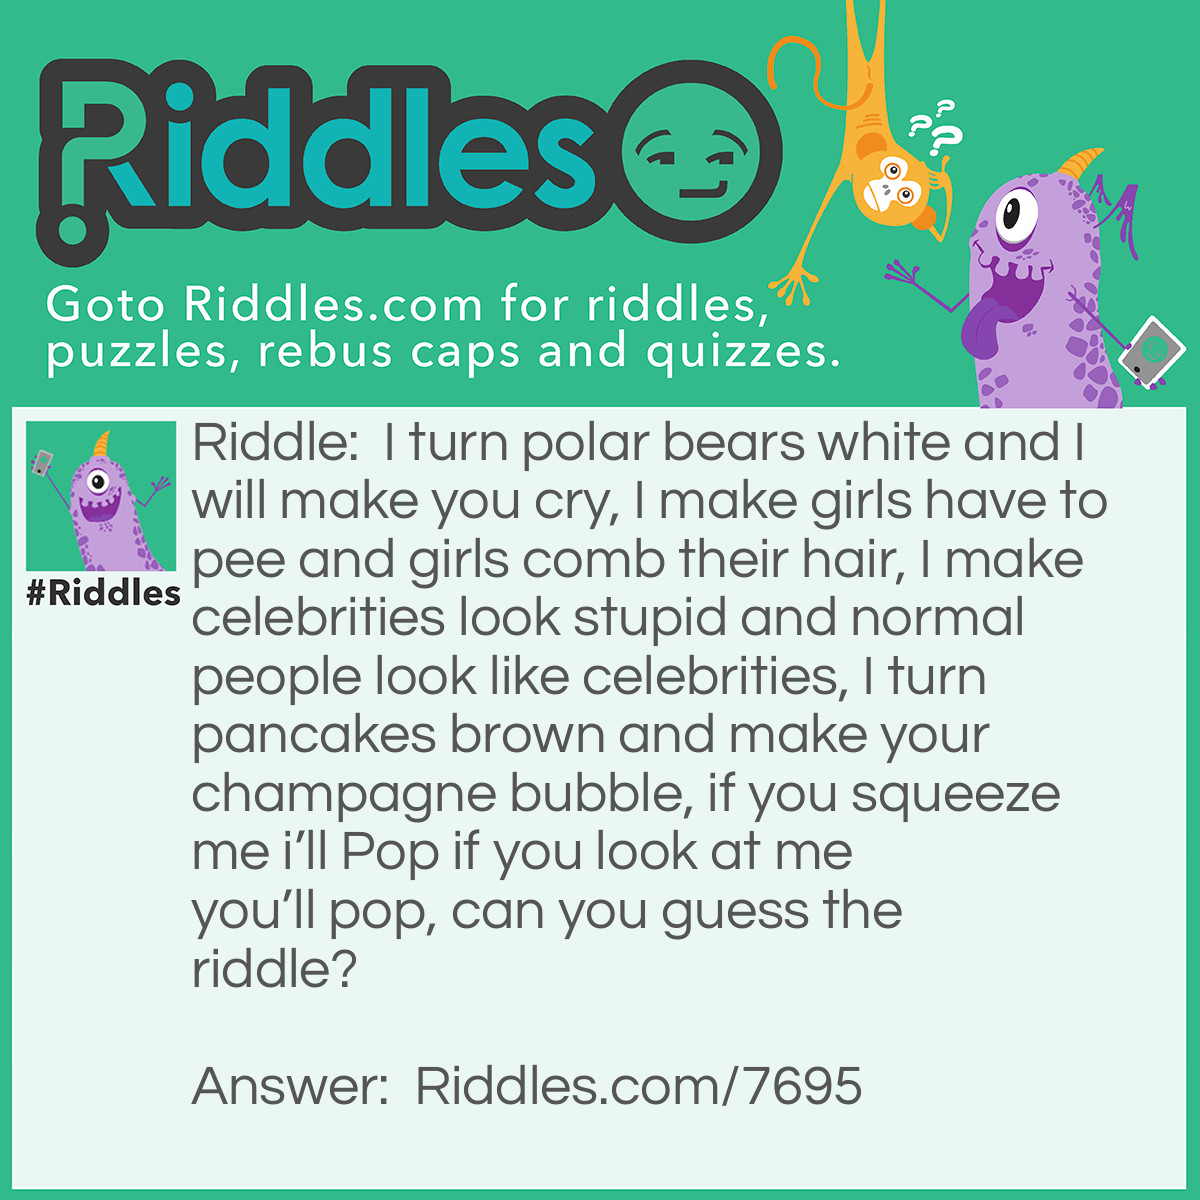 Riddle: I turn polar bears white and I will make you cry, I make girls have to pee and girls comb their hair, I make celebrities look stupid and normal people look like celebrities, I turn pancakes brown and make your champagne bubble, if you squeeze me i'll Pop if you look at me you'll pop, can you guess the riddle? Answer: No you cannot answer the riddle